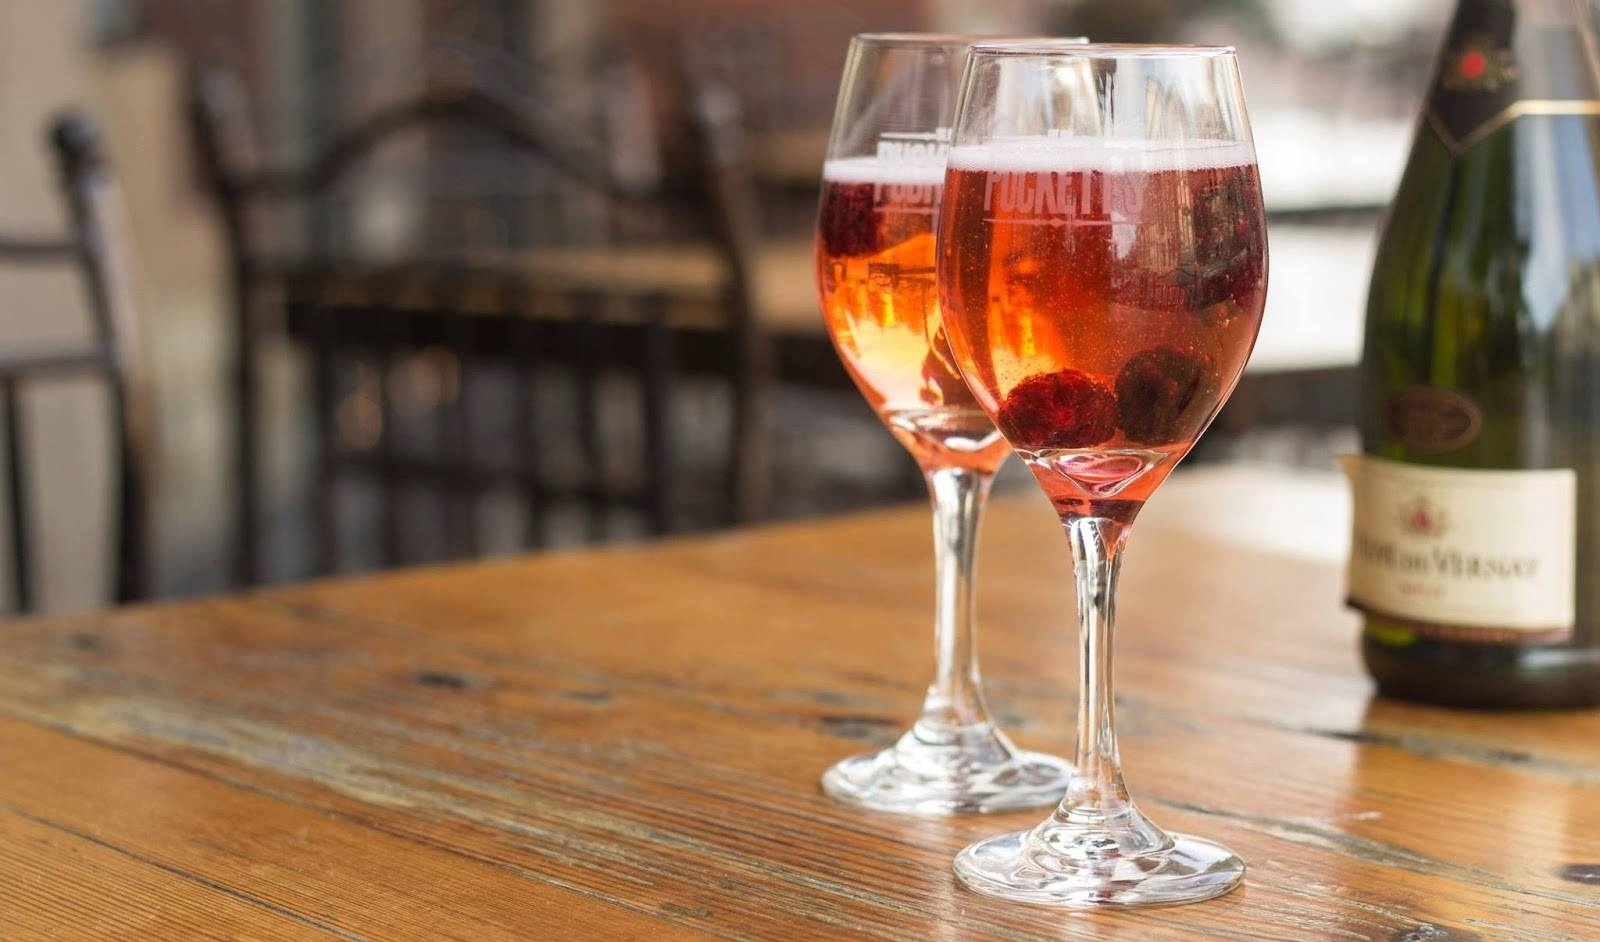 Puckett's downtown Franklin, wine glasses for Valentine’s Day event.